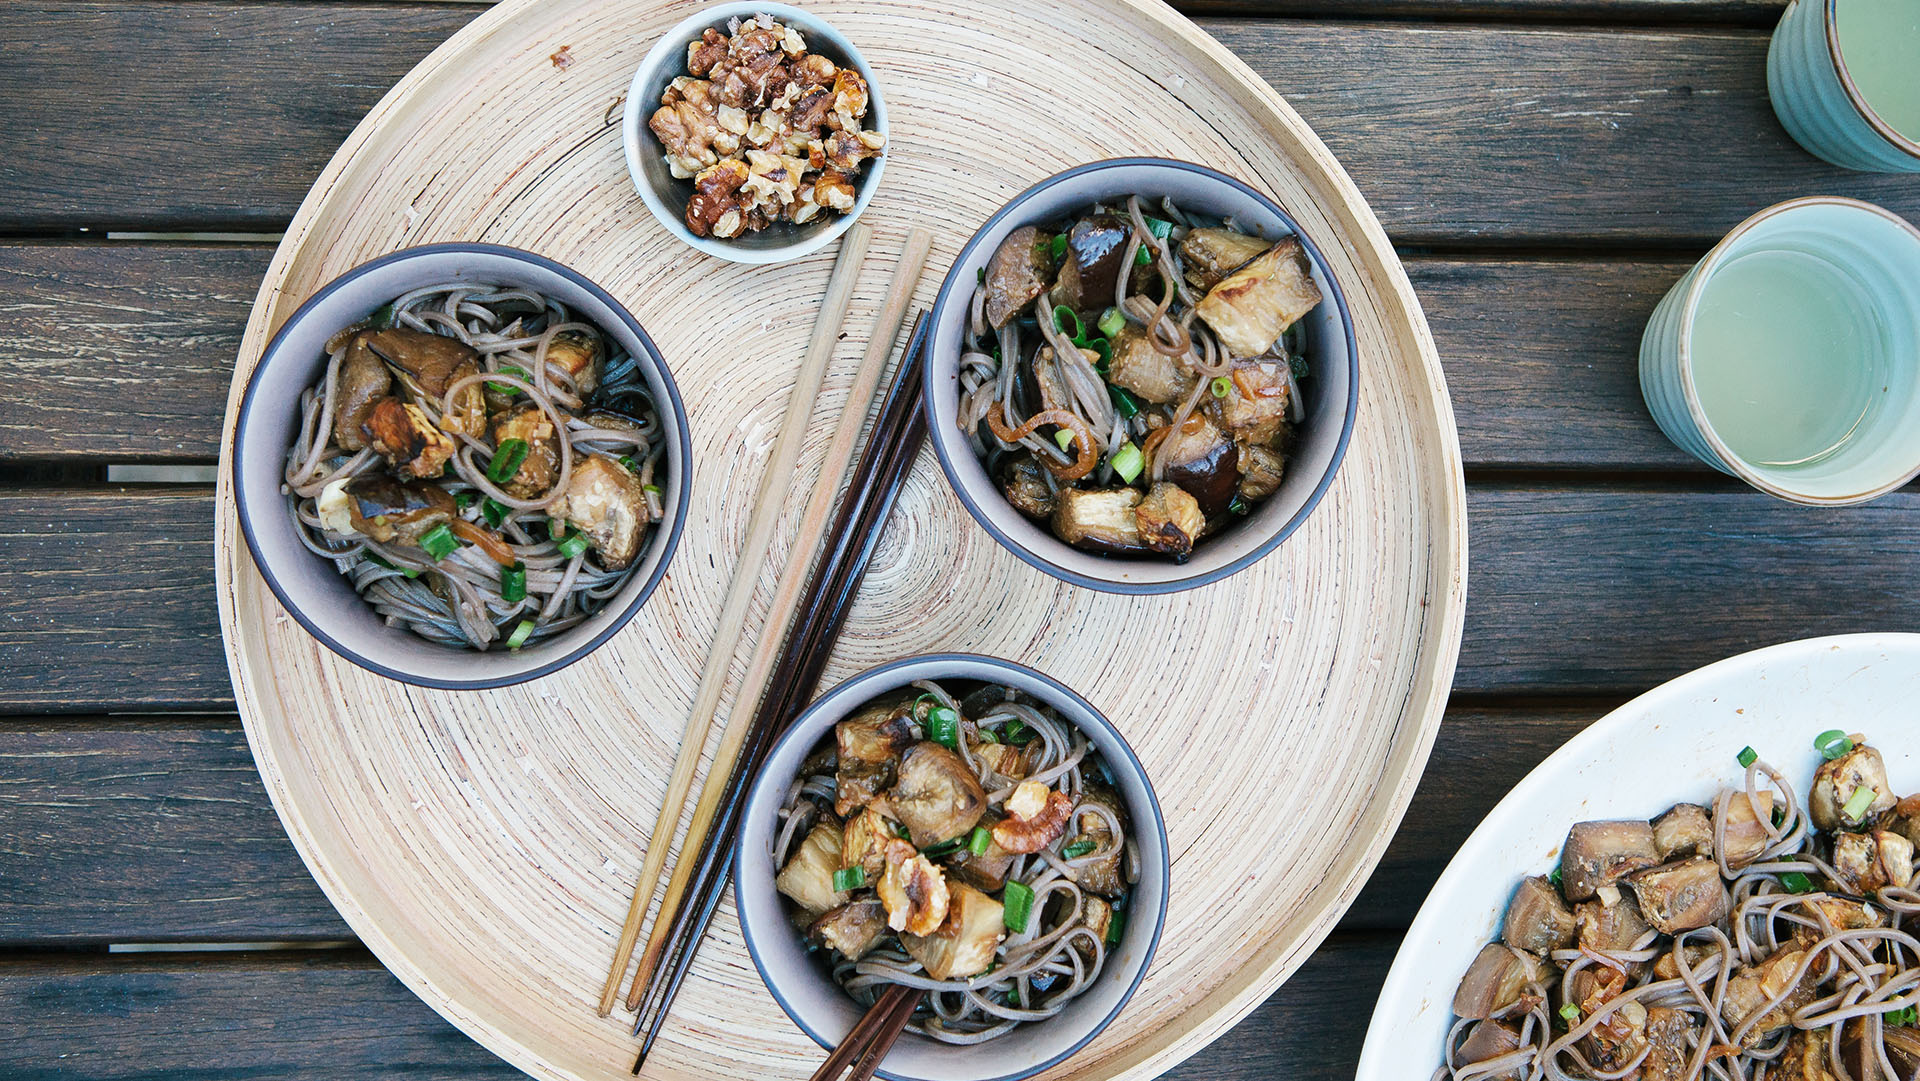 Miso eggplant with soba noodles and walnuts recipe